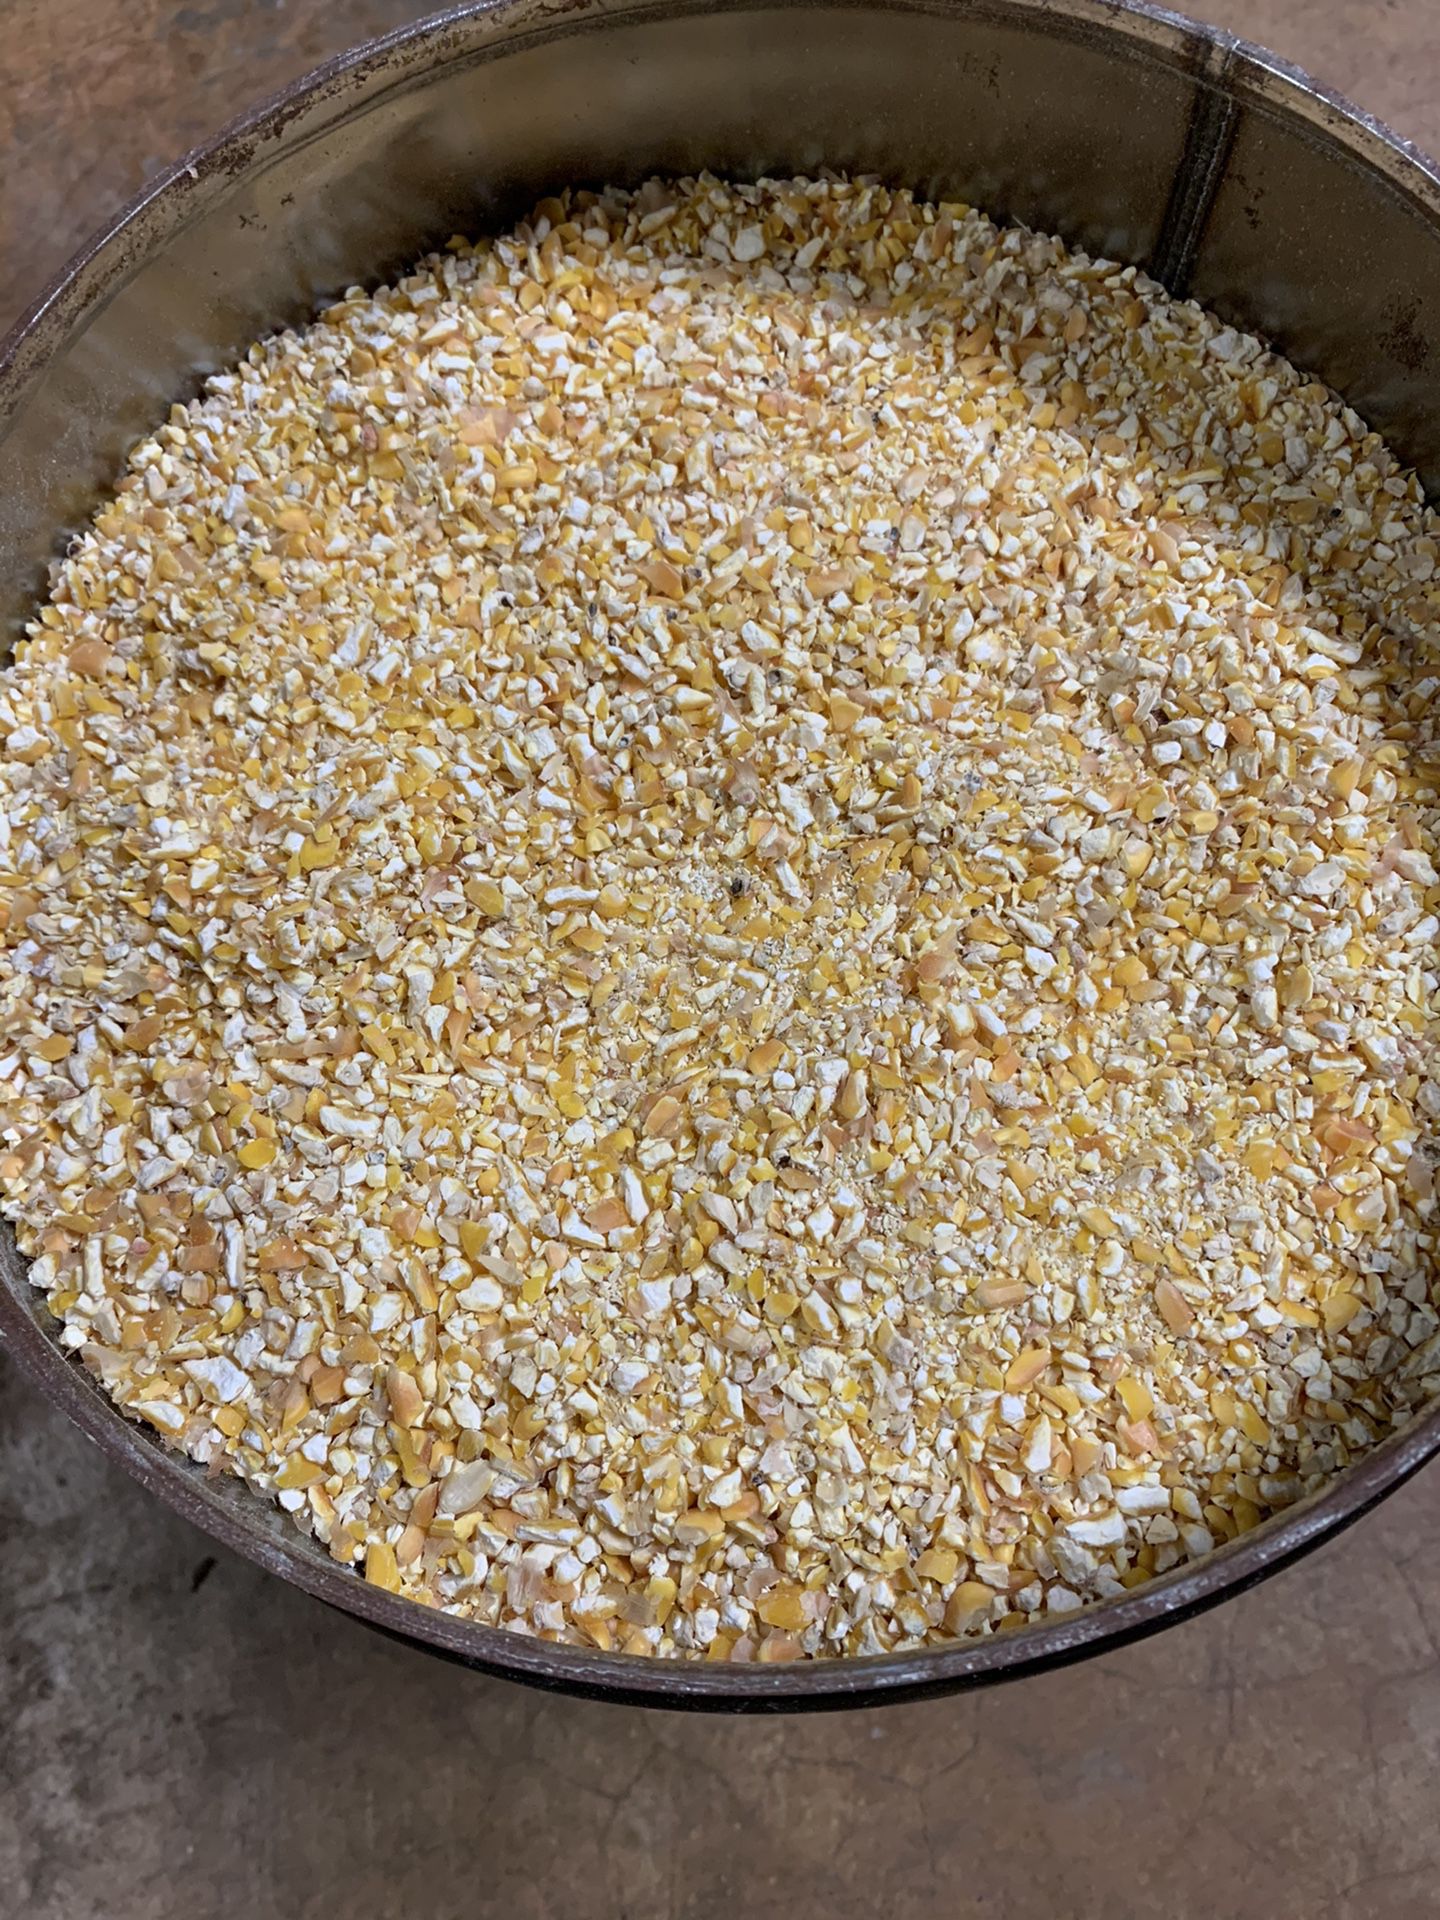 Cracked corn for birds,quails,chickens. By pound $1.50